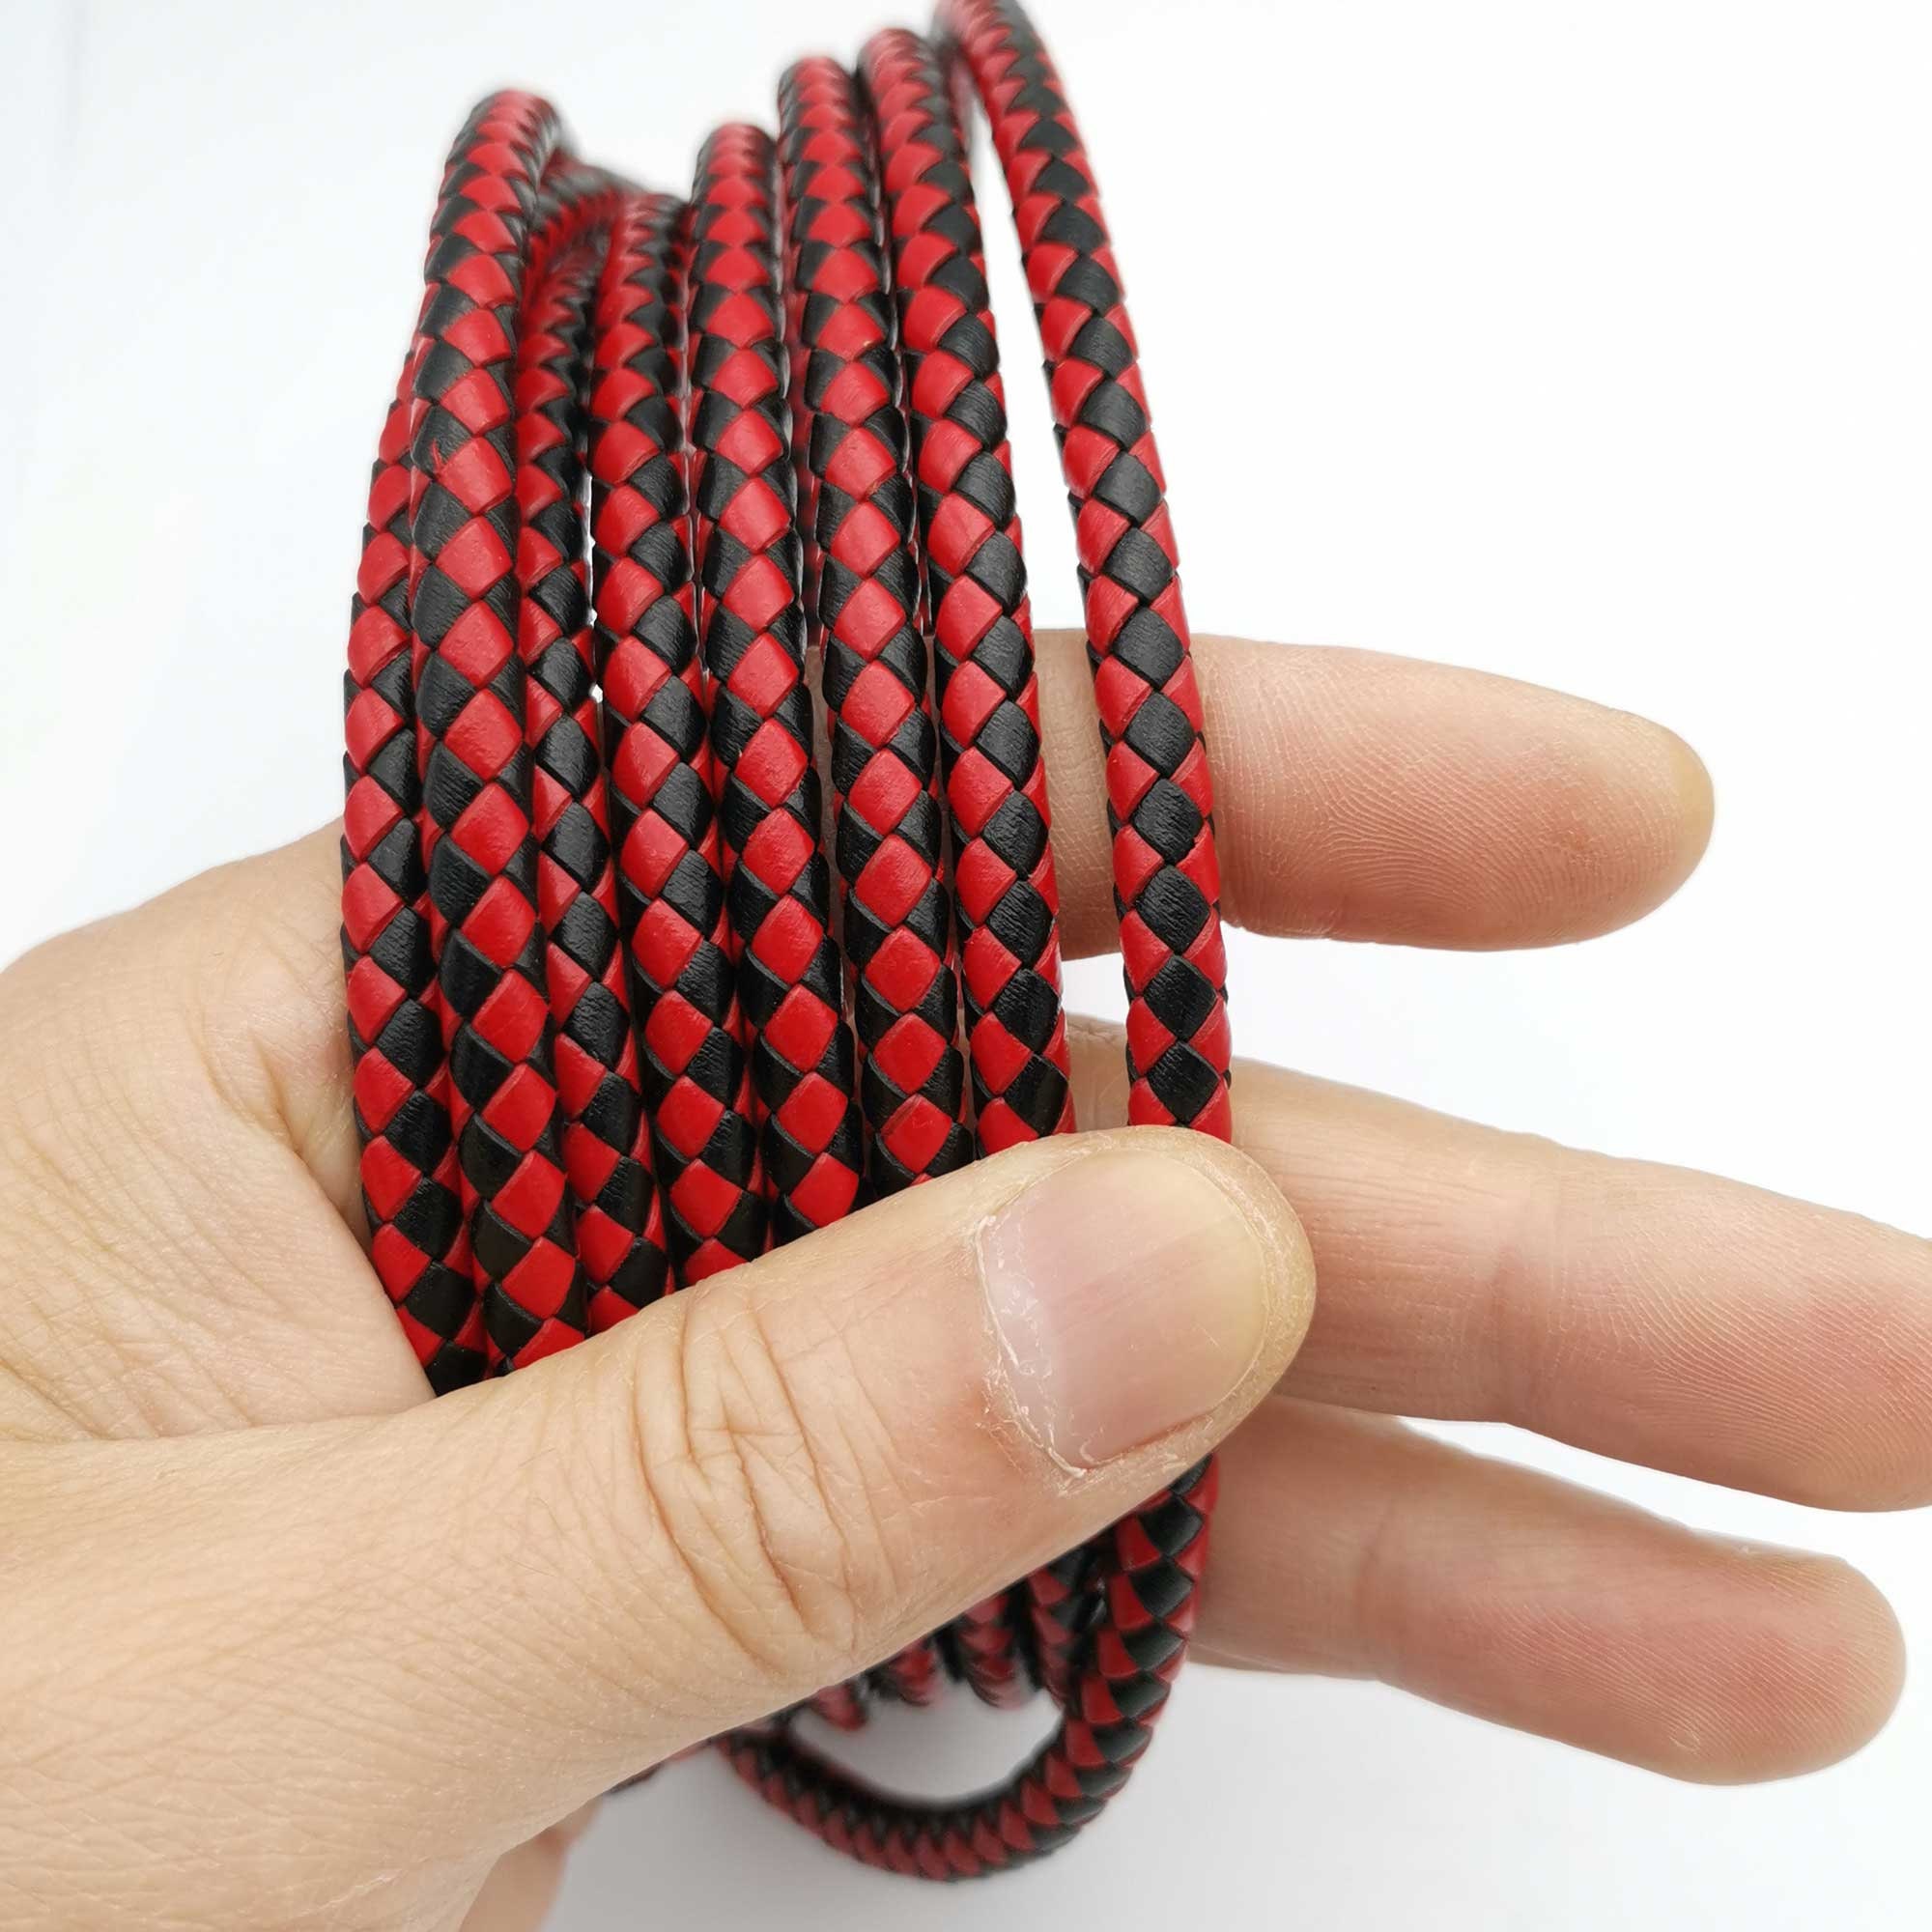 6mm Braided Leather Cord,1 metre Black Braided Leather Cord,Faux Leather  Cord, DIY Necklace Bracelet Cord